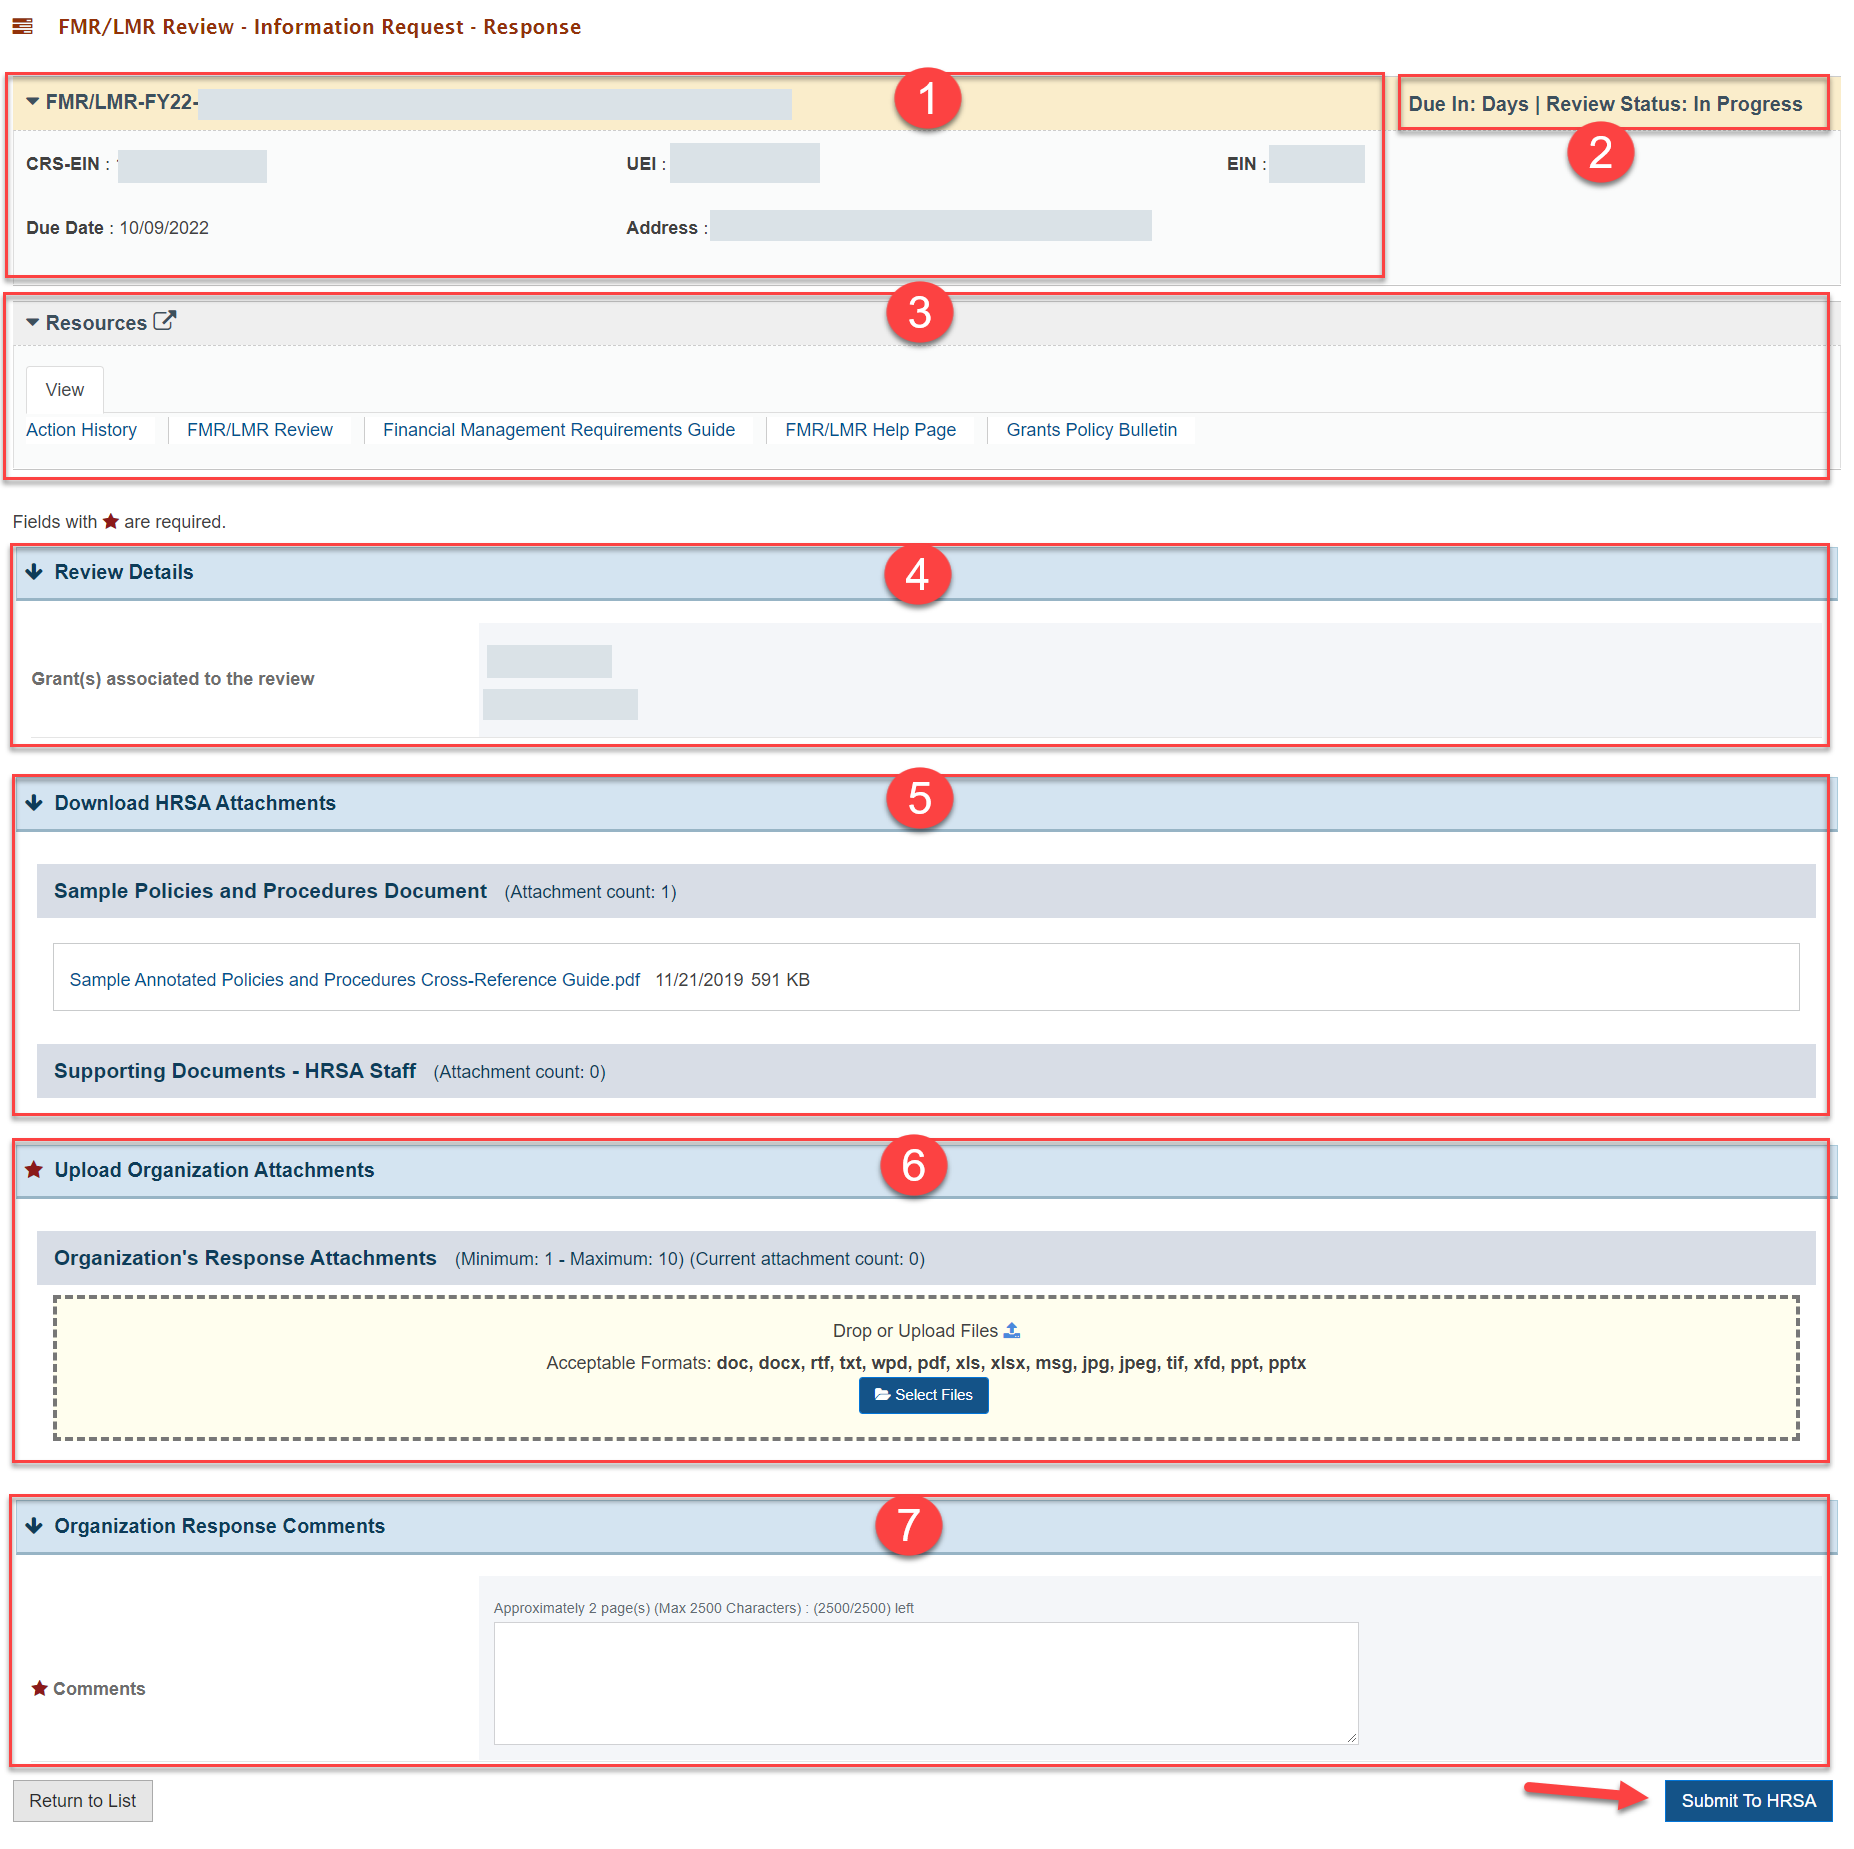 Screenshot of the FMR LMR Information Request Response page